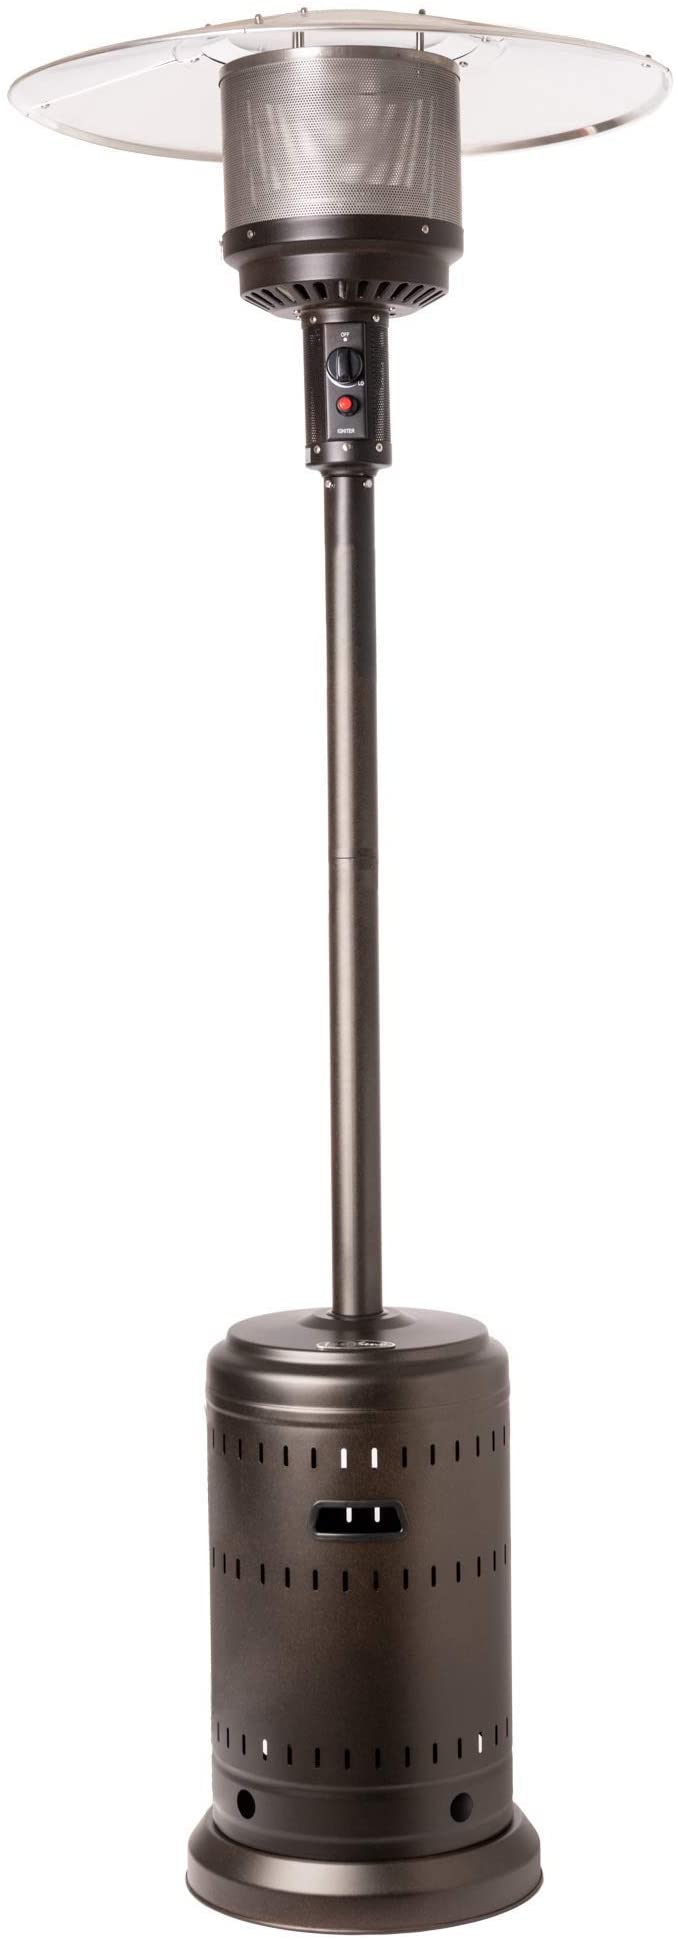 Fire Sense Espresso Finish Commercial Patio Heater with Wheels | Powder Coated Steel Construction | Uses 20 Pound Propane Tank | 46,000 BTU Output | Piezo Ignition System | Portable Outdoor Heat Lamp